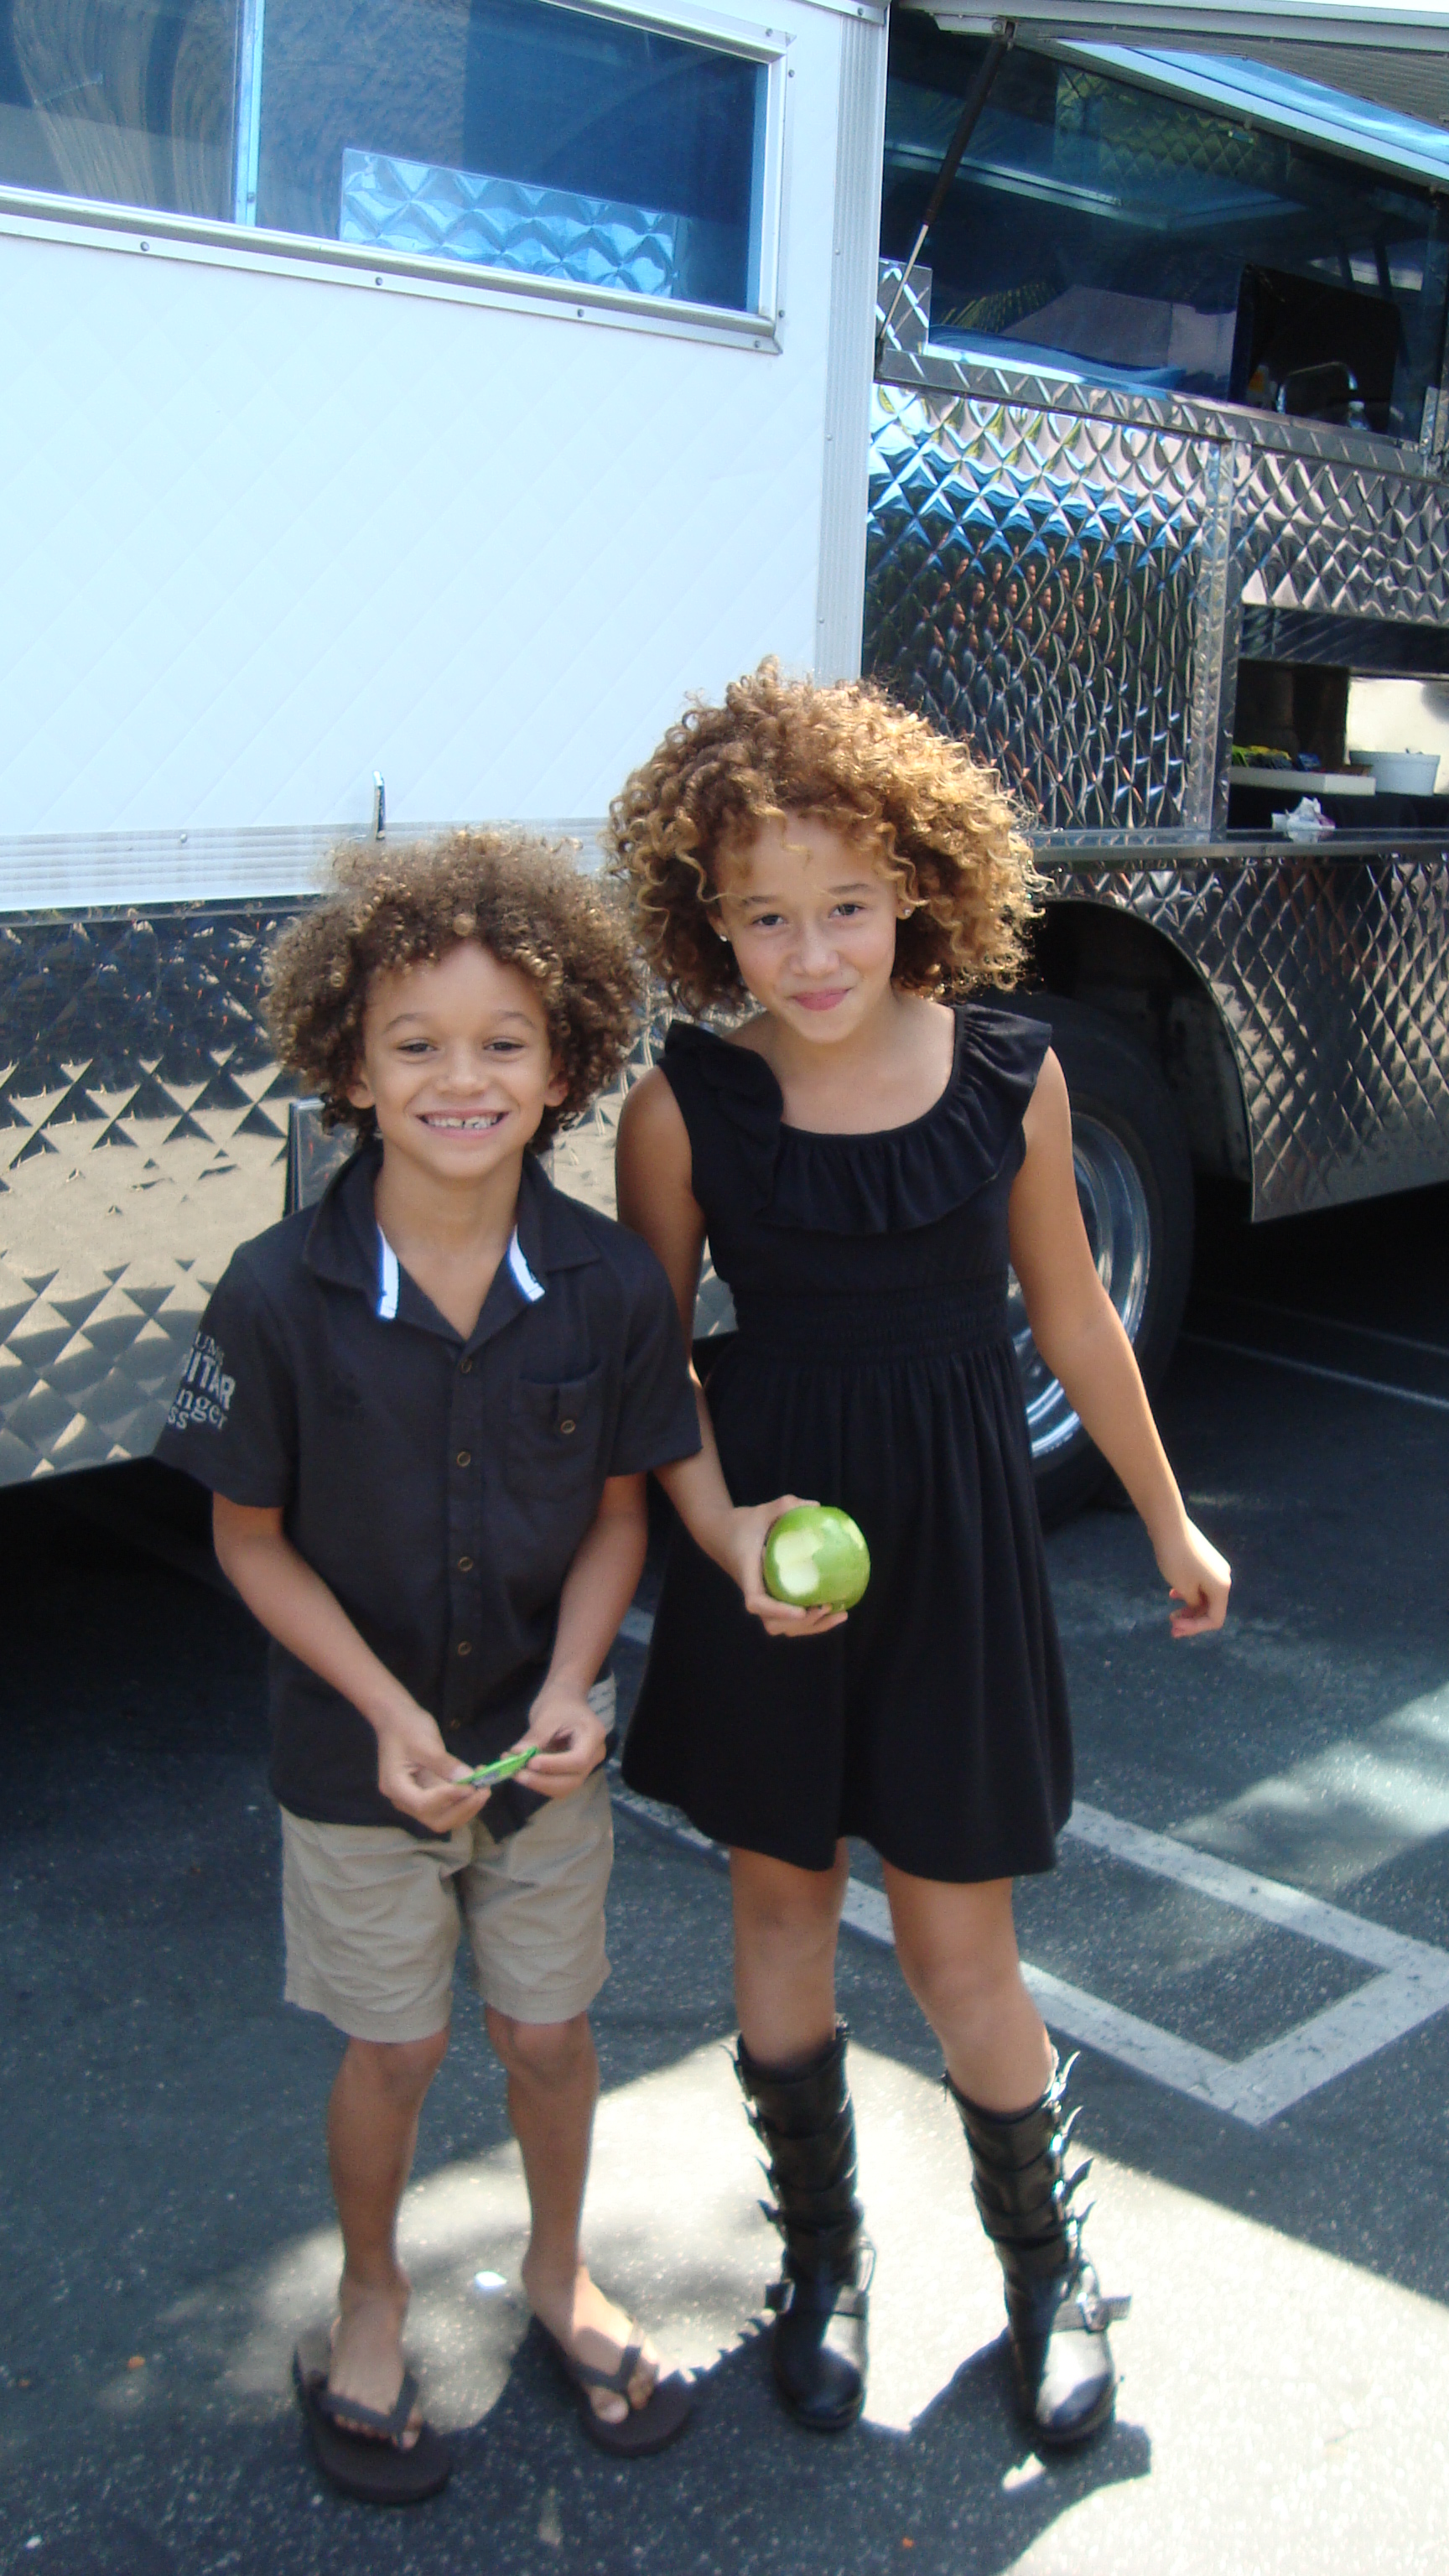 Talia and Armani at her JcPenney National Commercial Shoot